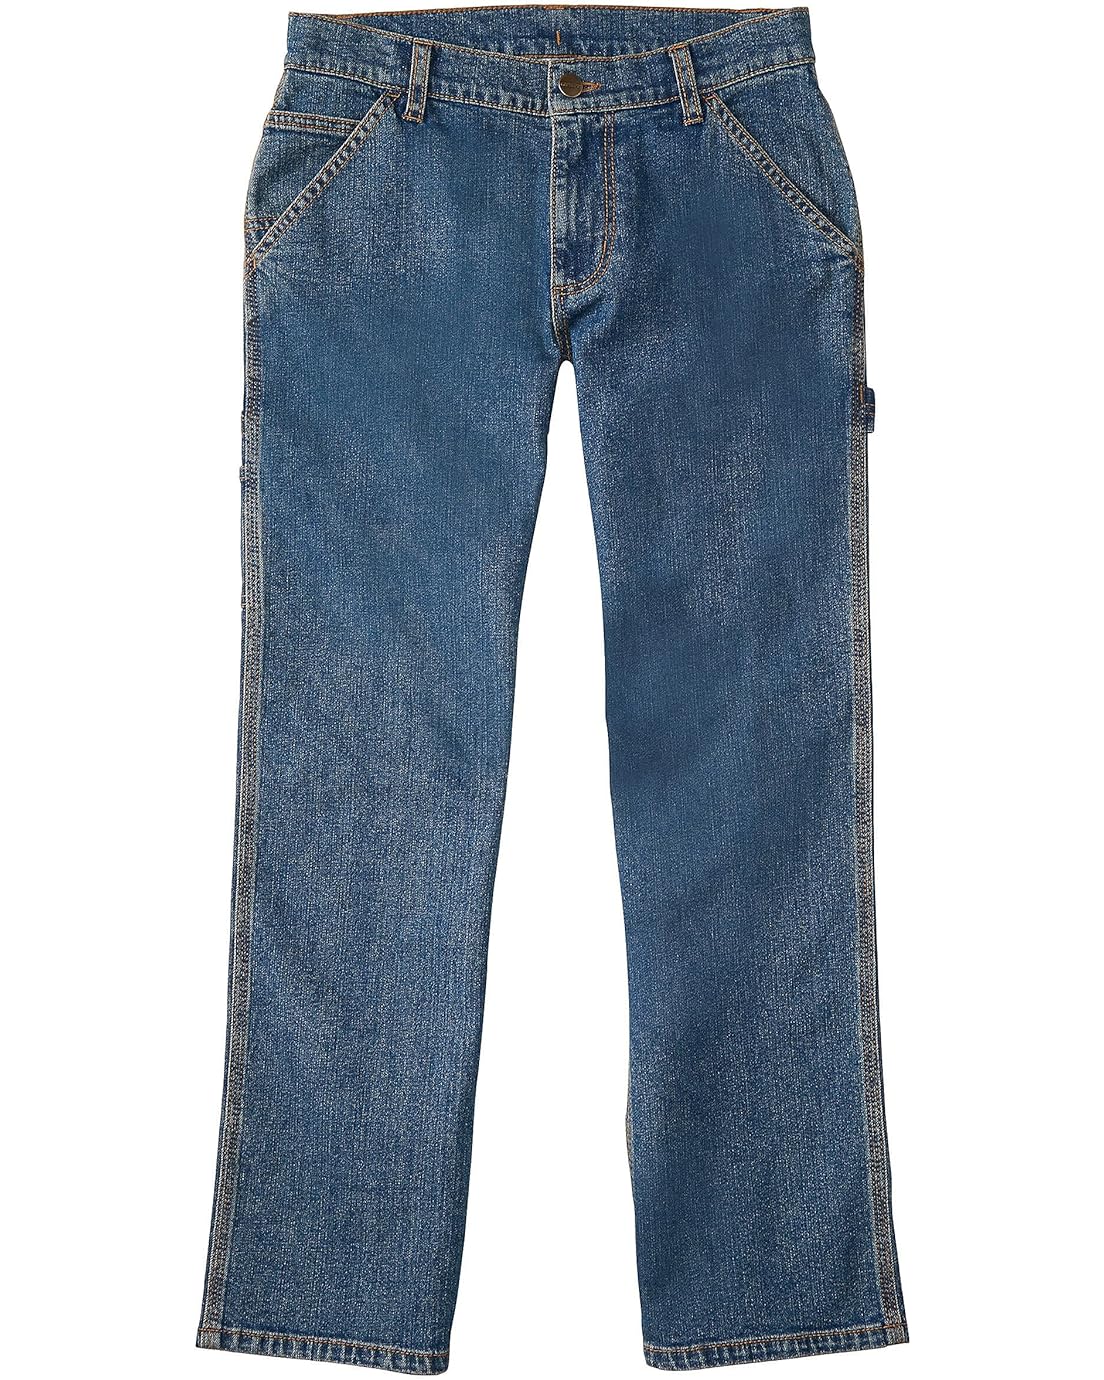 Carhartt Boys Washed Dungaree Pants (Lined and Unlined)